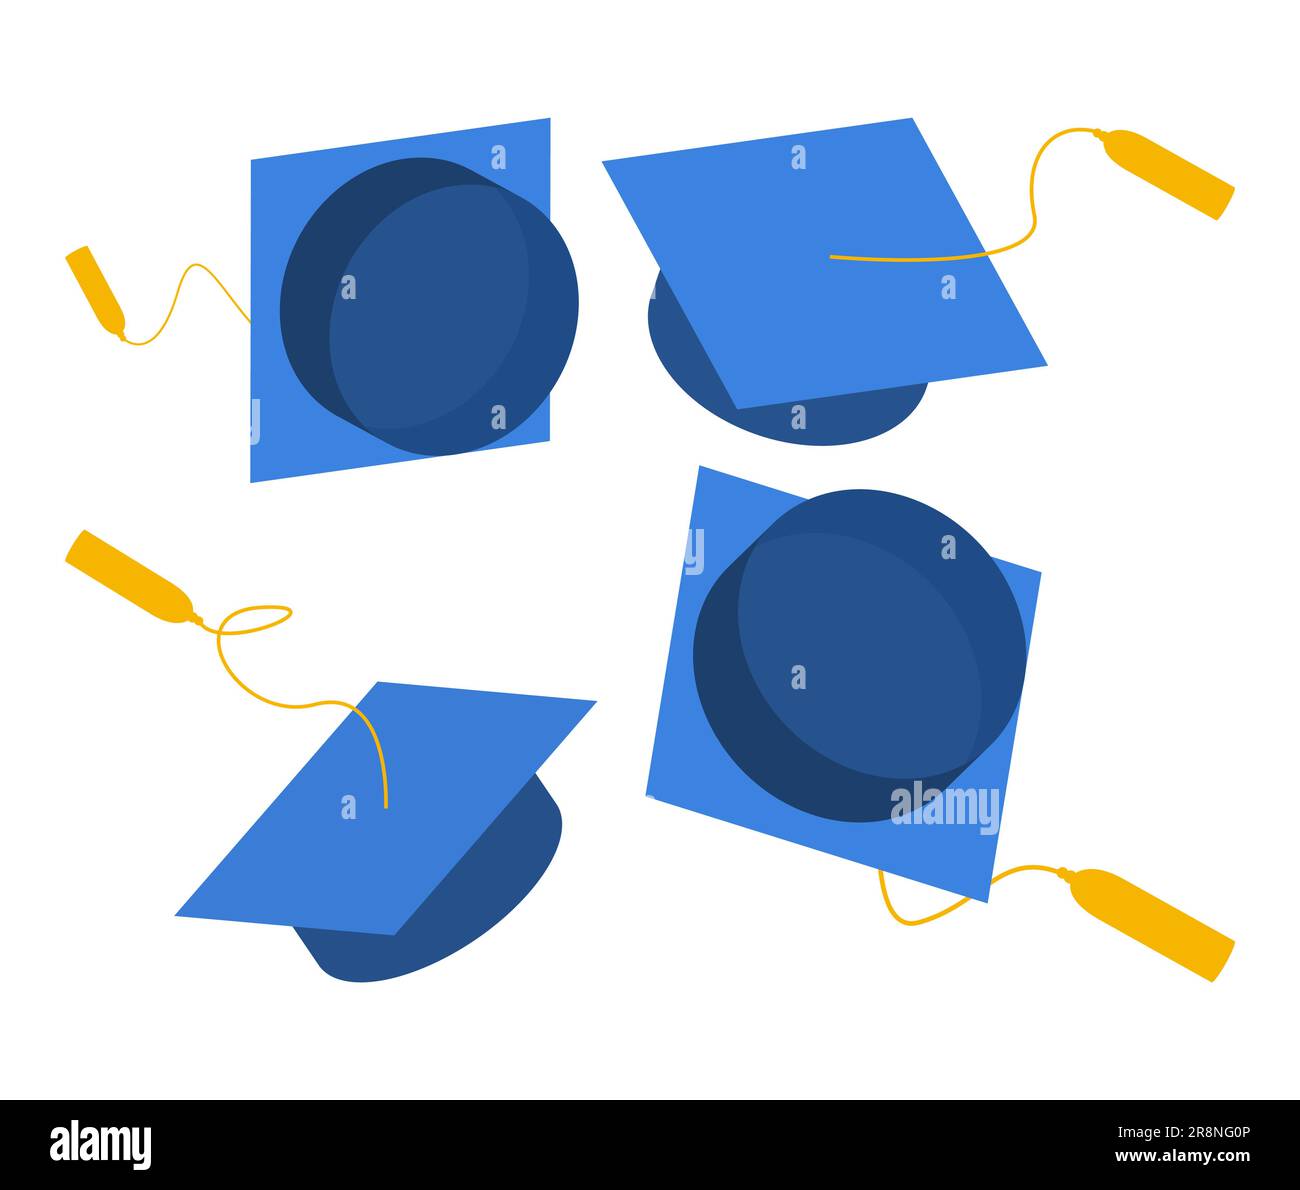 Set of Graduation cap, mortar board icons. Vector illustration of Academic caps. Student hat icon use for print, web and app. Stock Vector